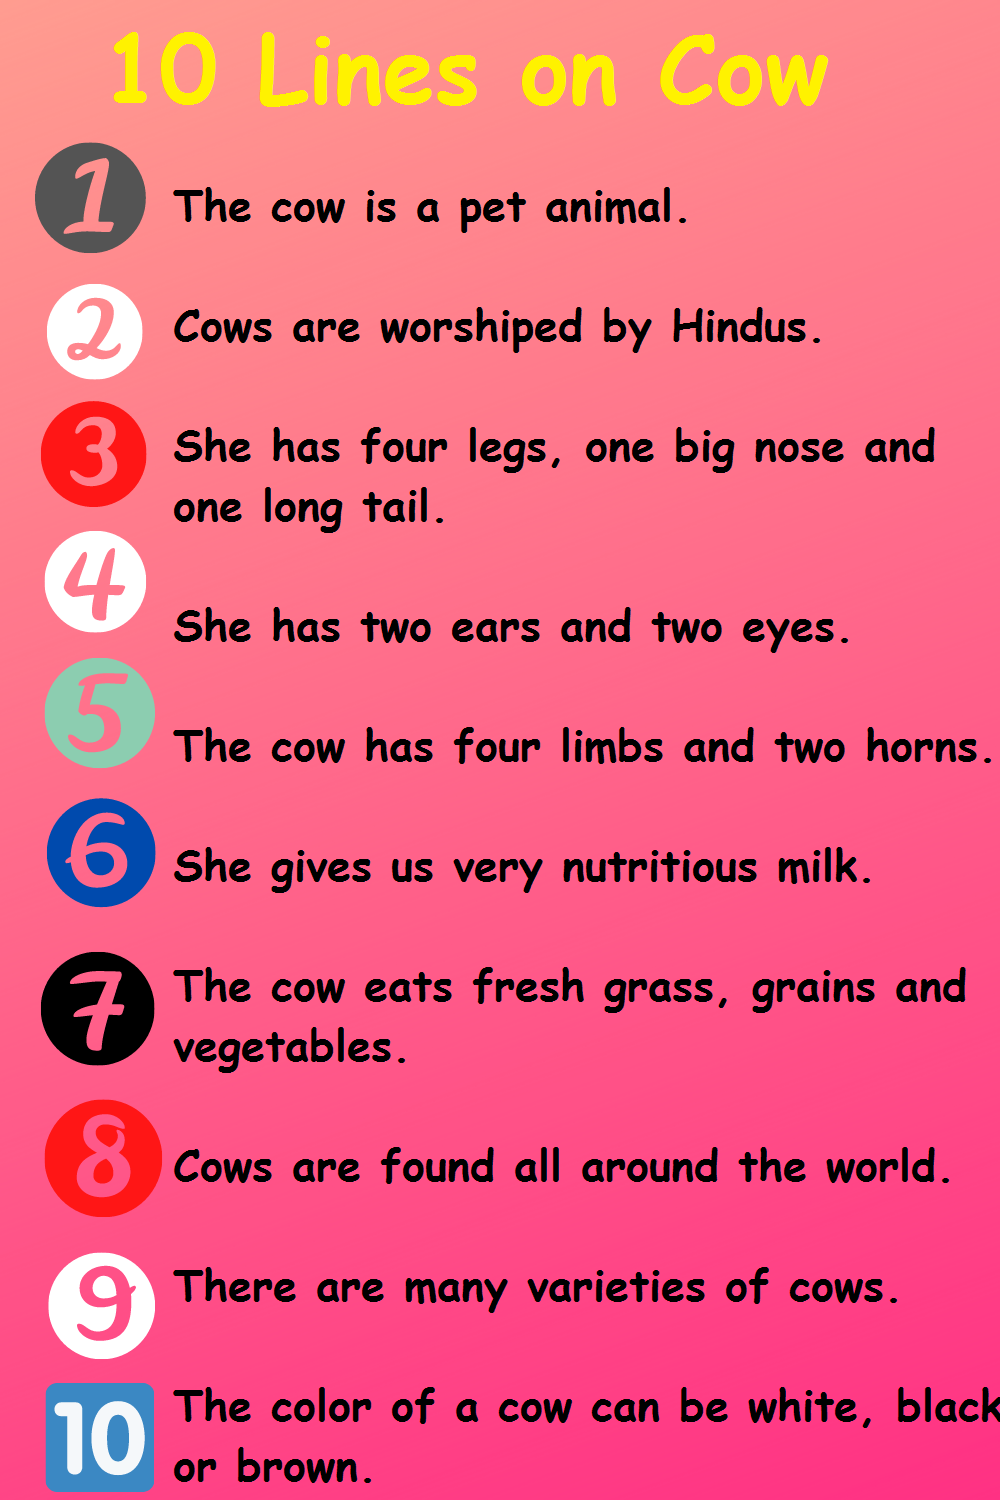 cow essay in english 10 lines for class 3